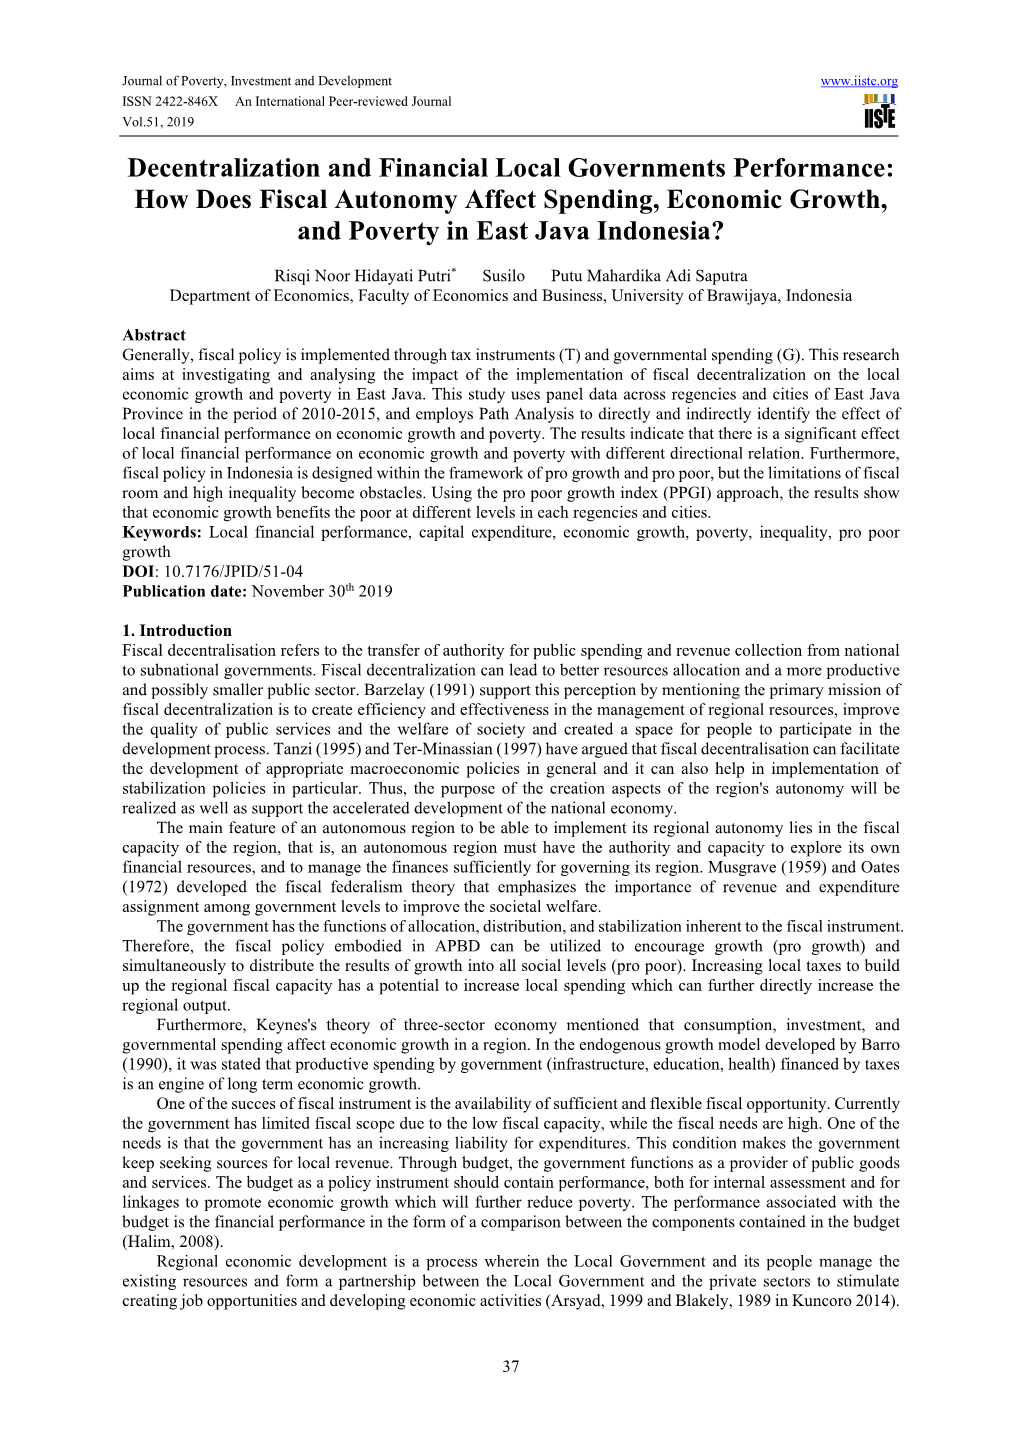 Decentralization and Financial Local Governments Performance: How Does Fiscal Autonomy Affect Spending, Economic Growth, and Poverty in East Java Indonesia?